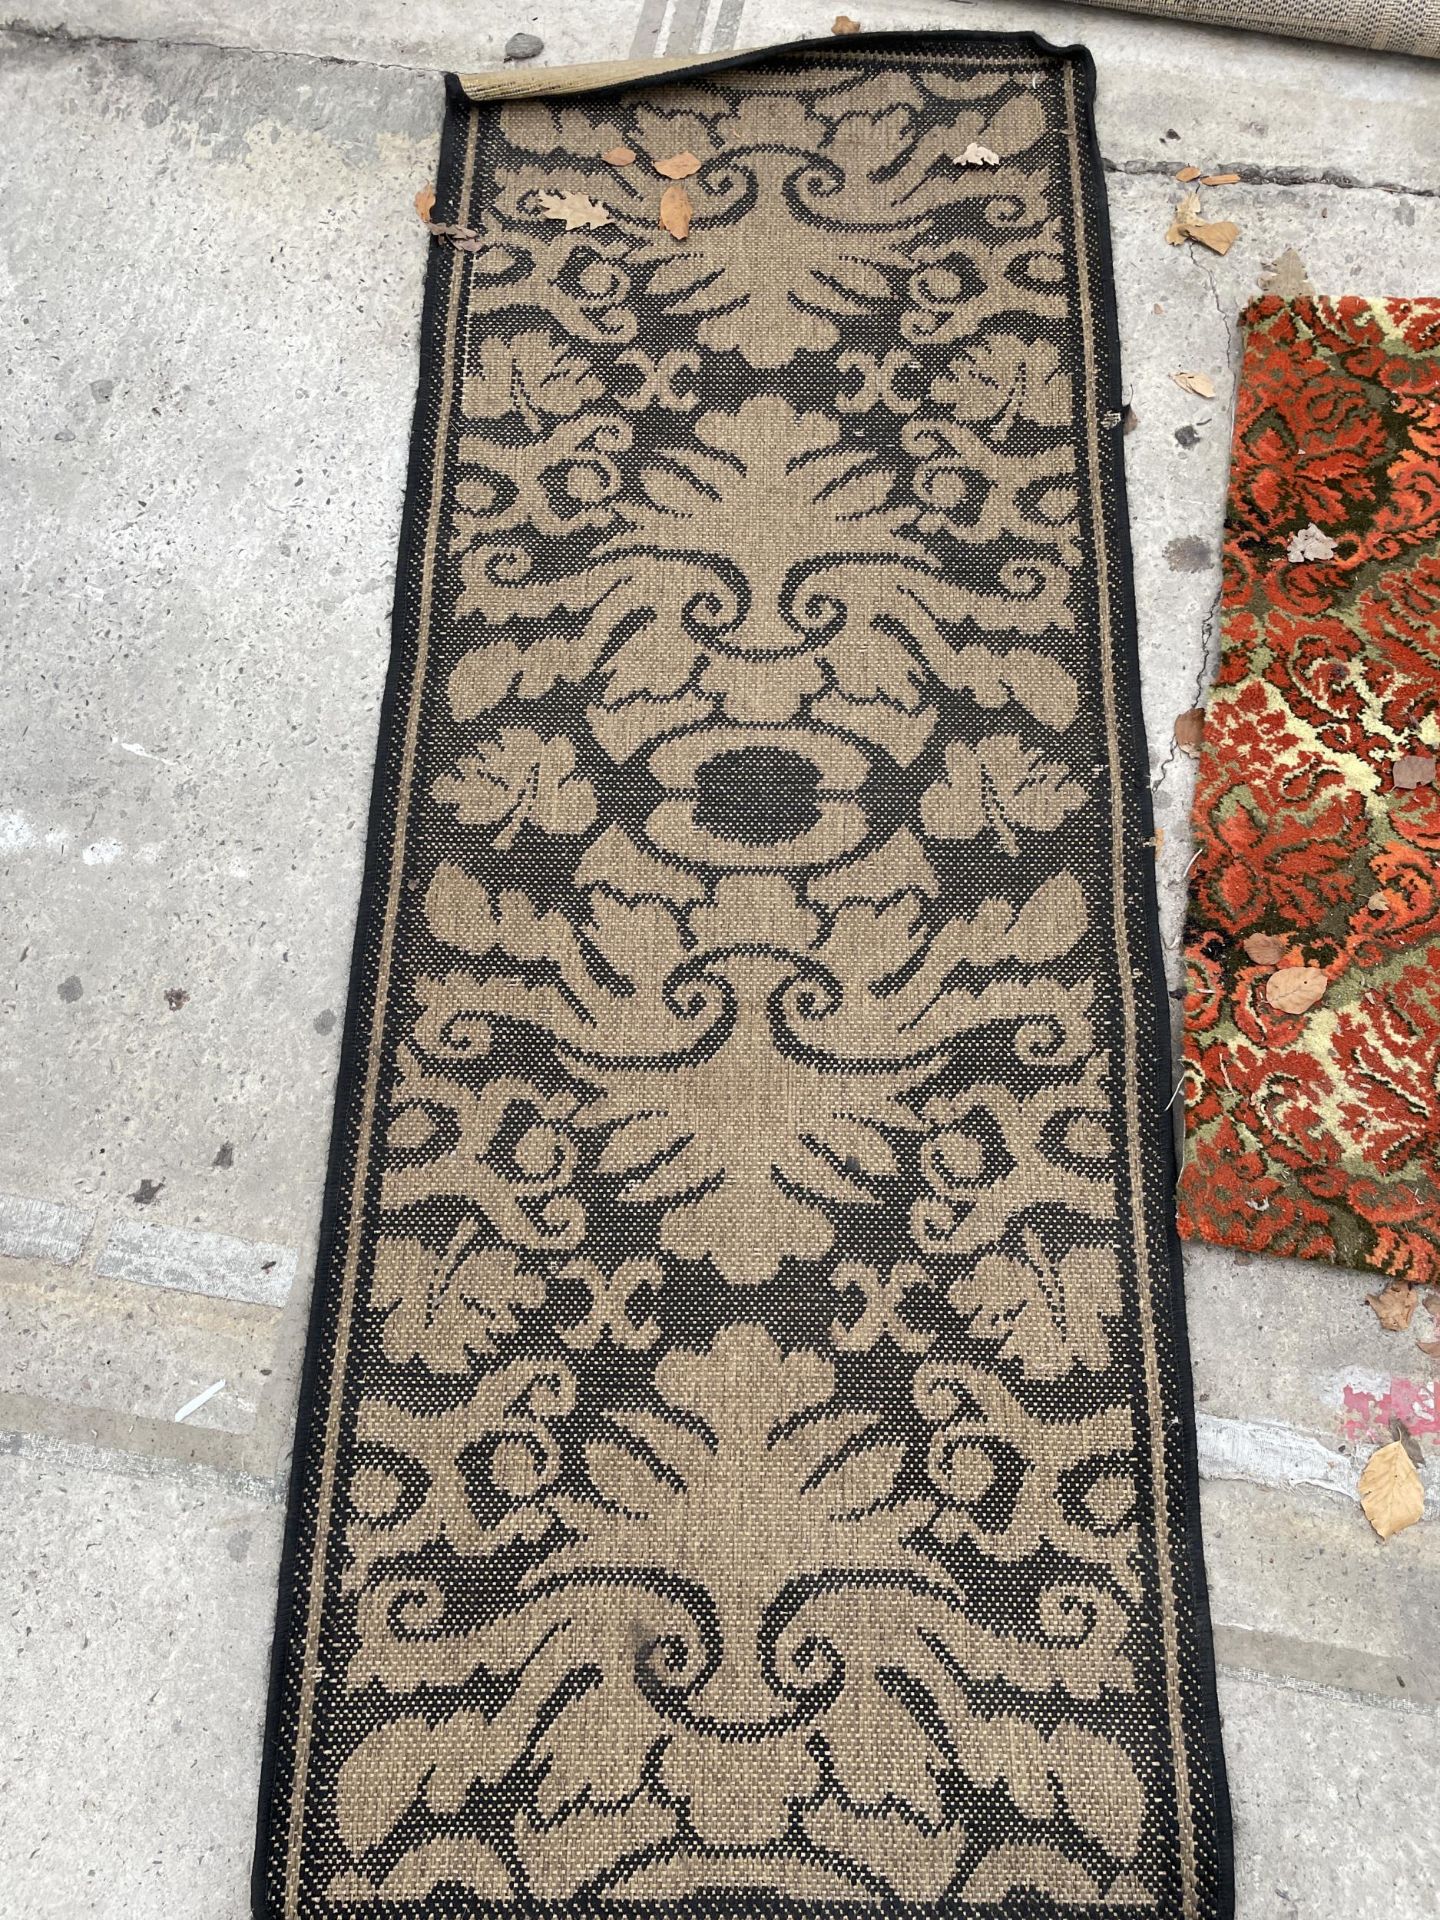 A SMALL BLACK PATTERNED RUG